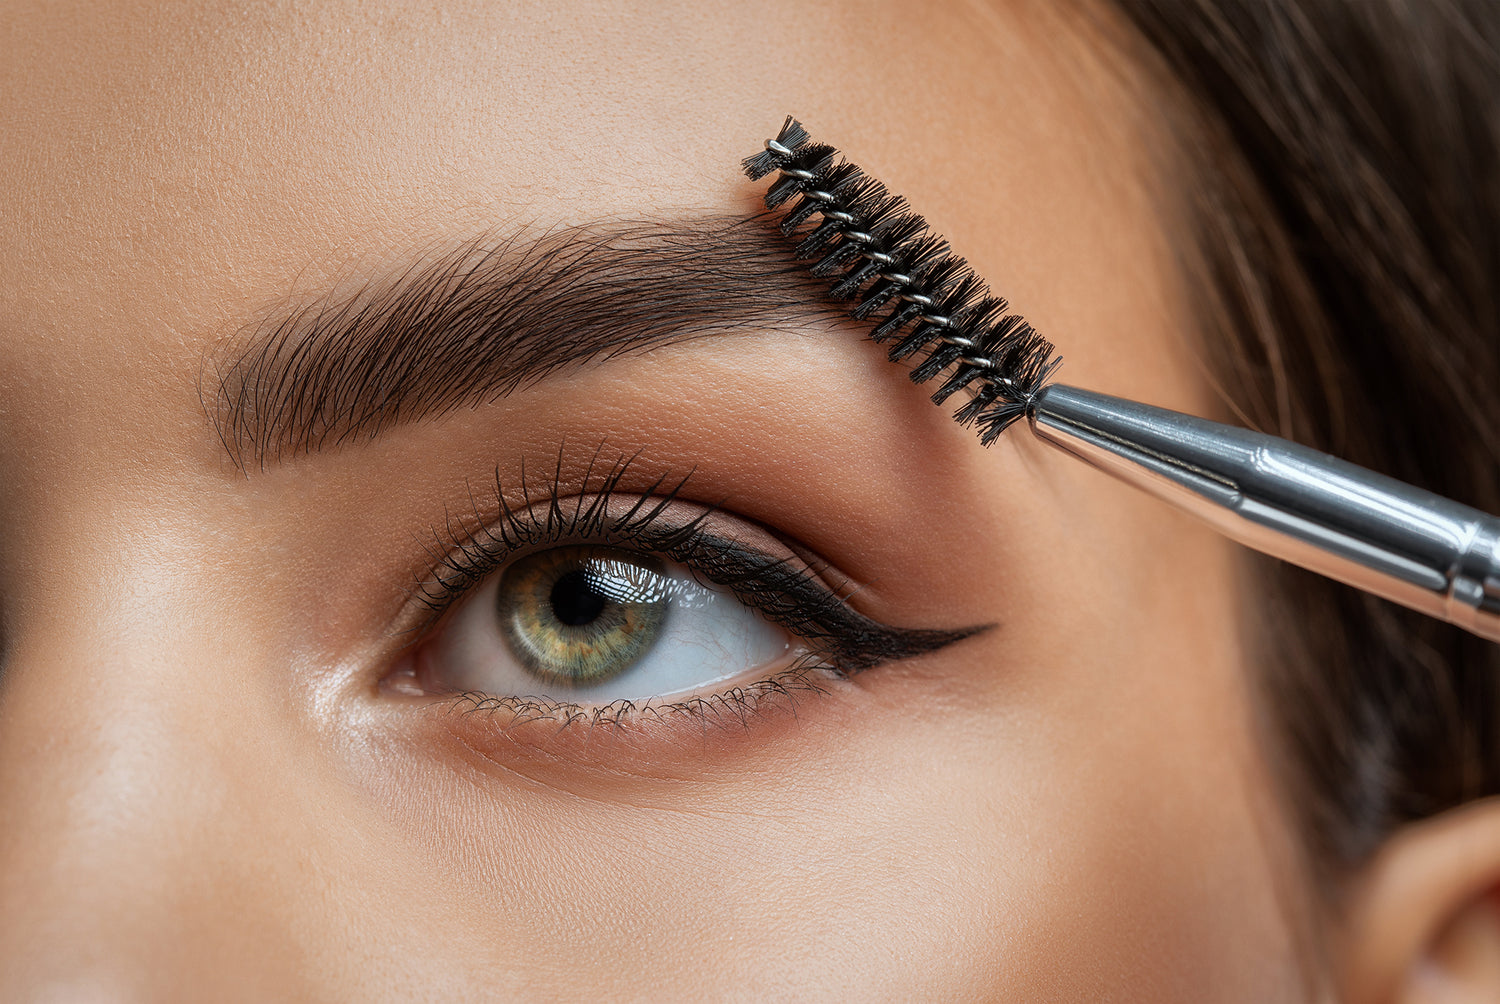 Microblading Removal in Montreal - Dermature | Retrait de Microblading à Montréal - Dermature